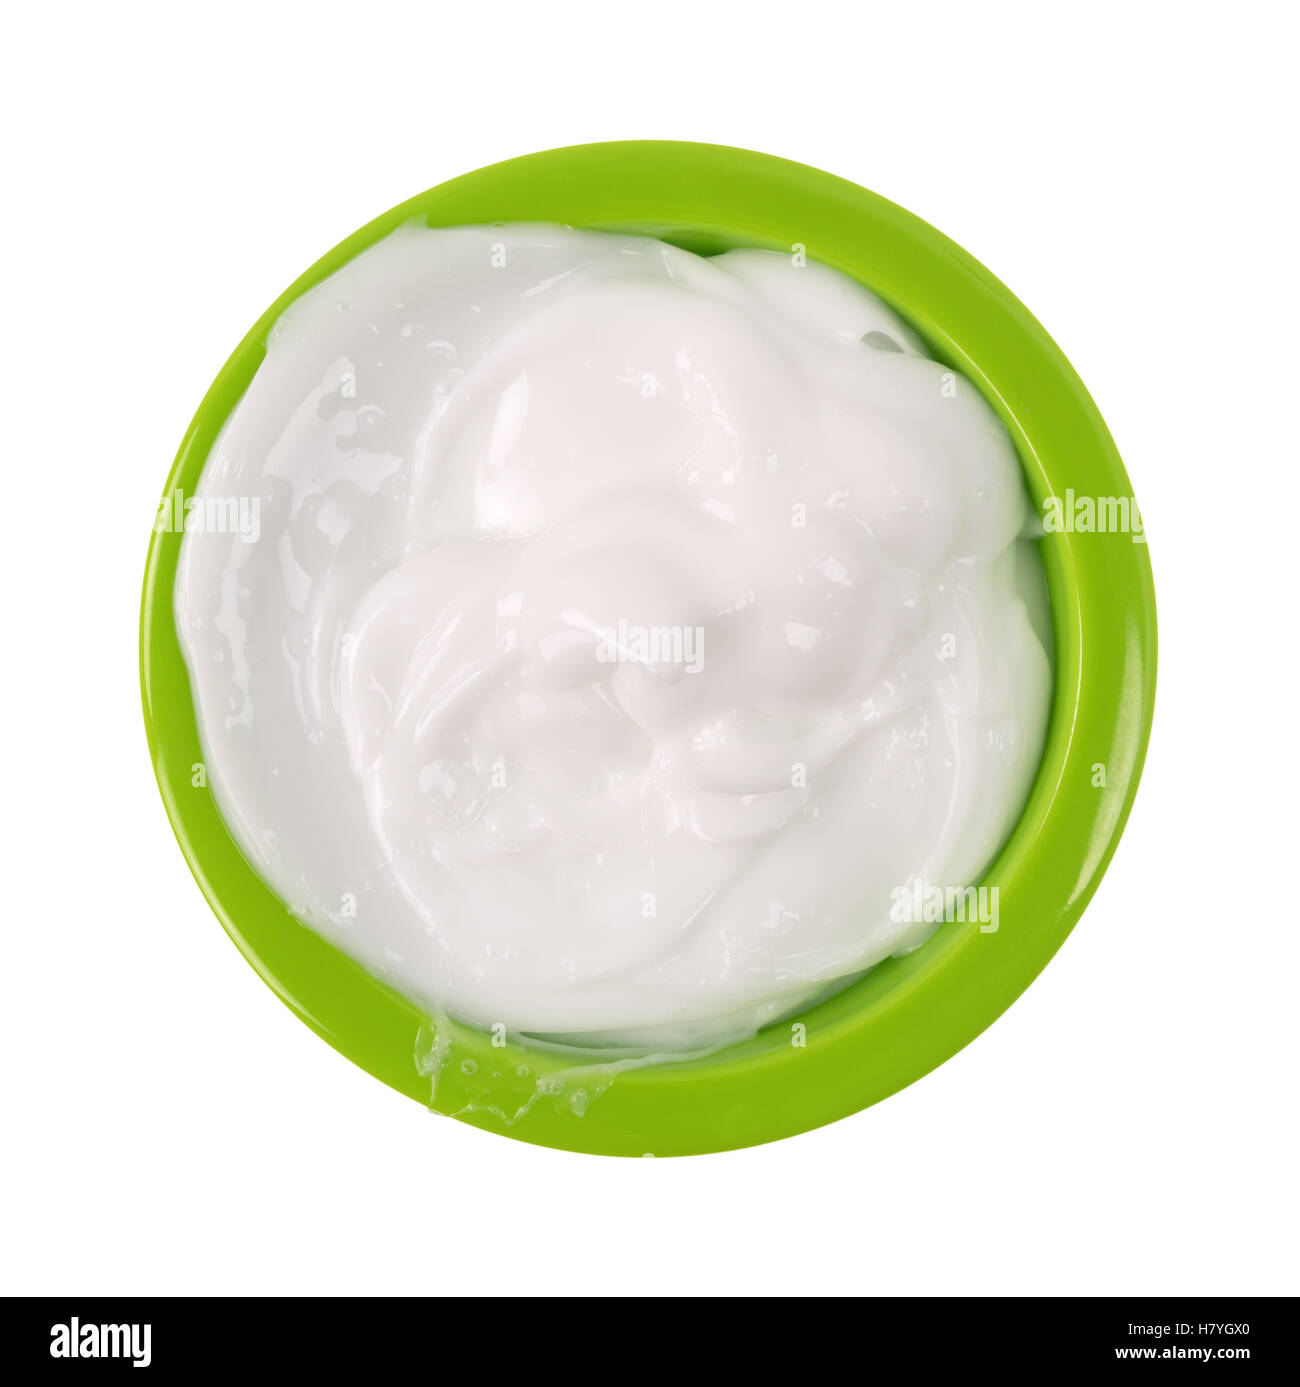 A small green bowl messily filled with vitamin E lotion isolated on a white background. Stock Photo